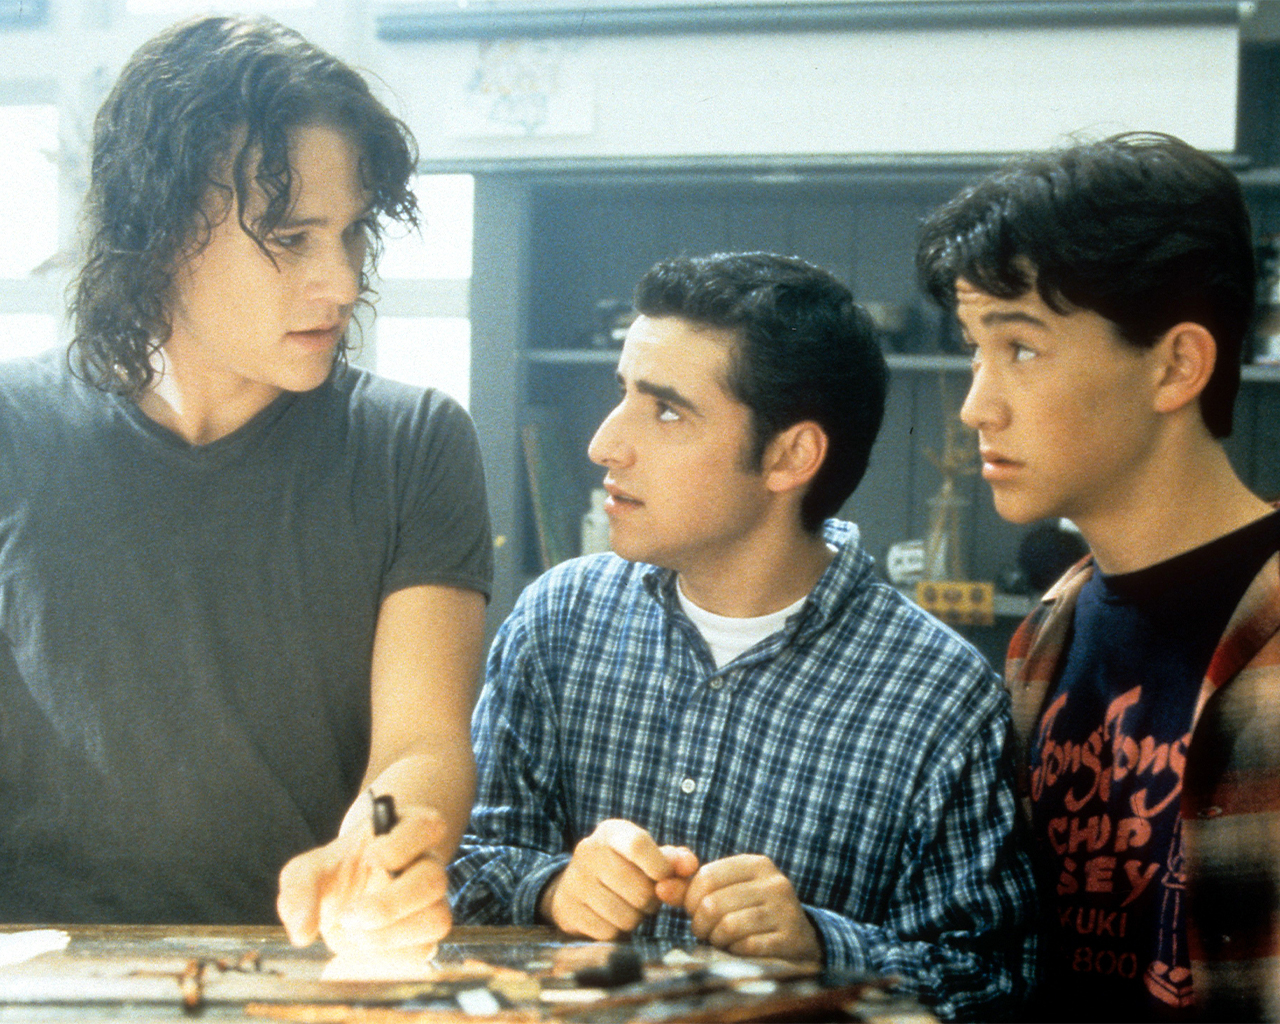 “10 Things I Hate About You” Director Reveals Secret on-Set Romance